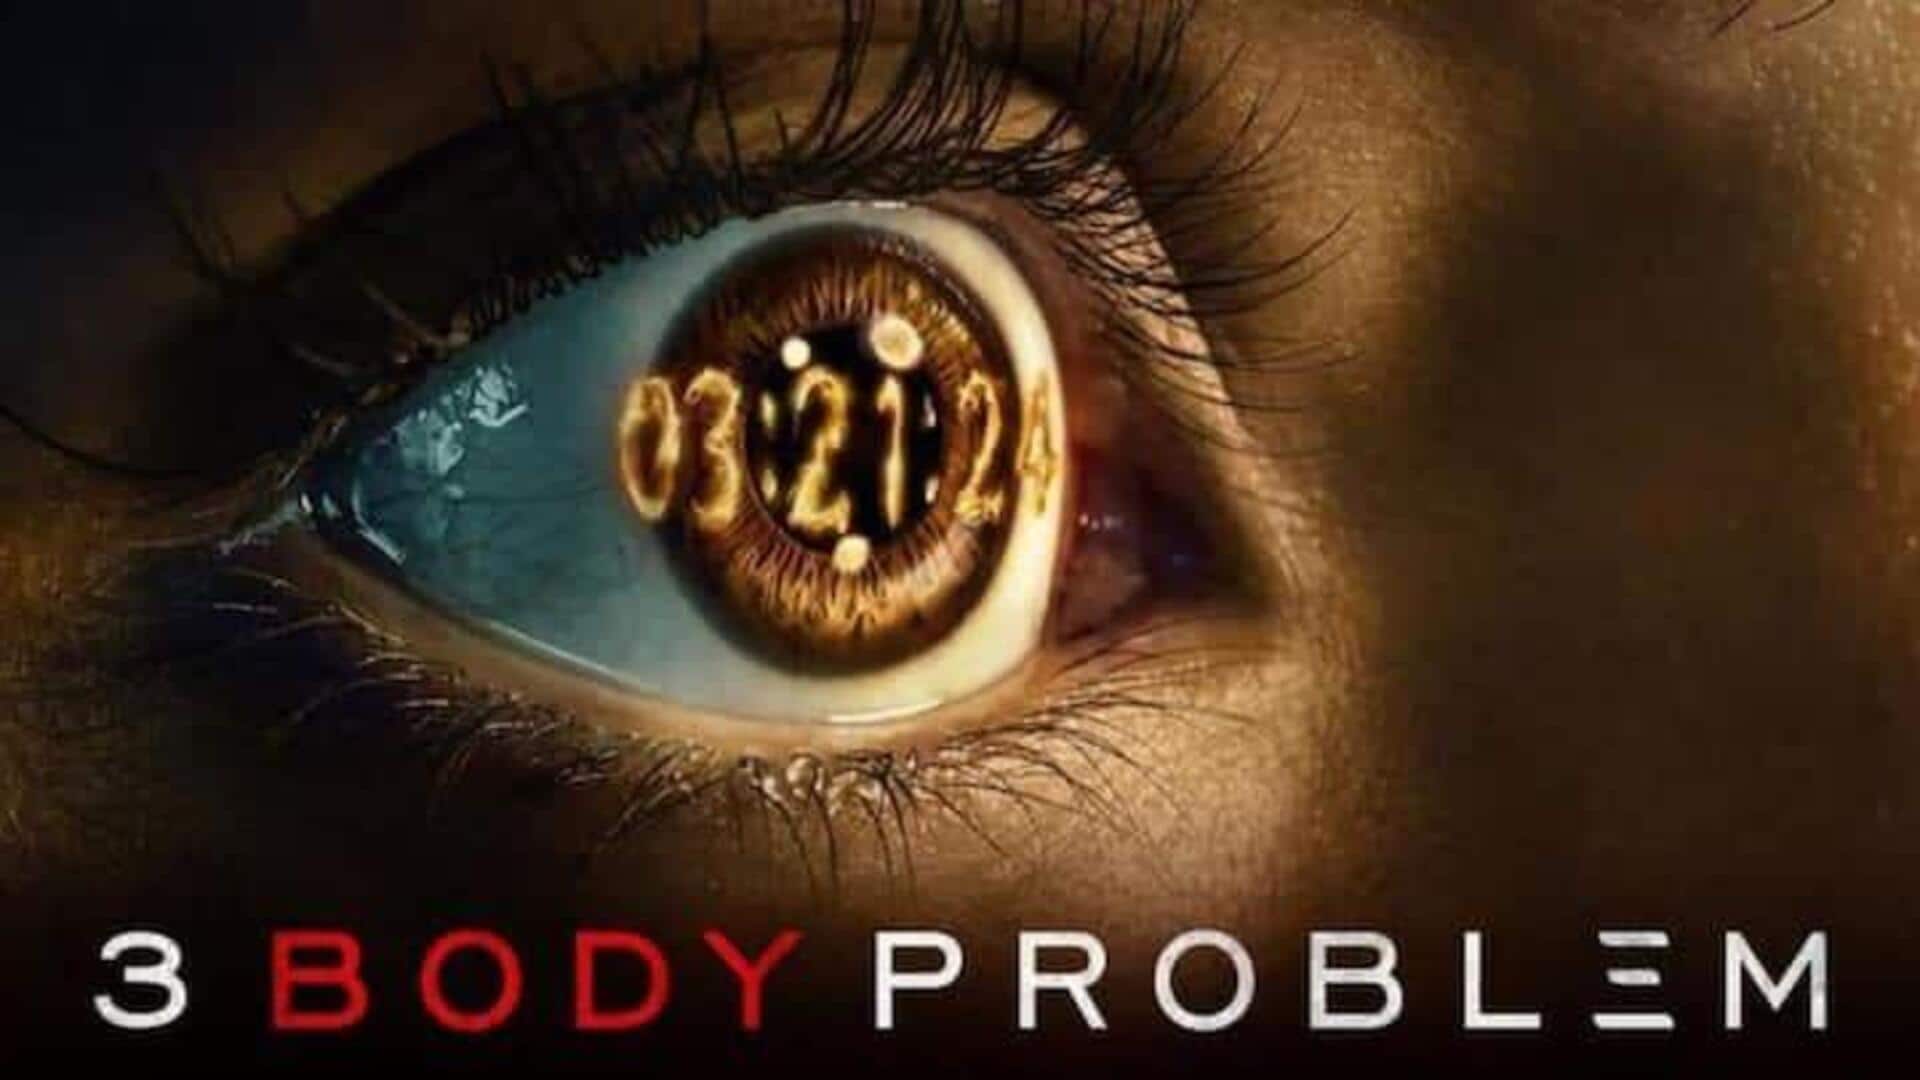 Netflix's '3 Body Problem' confirmed for two more seasons